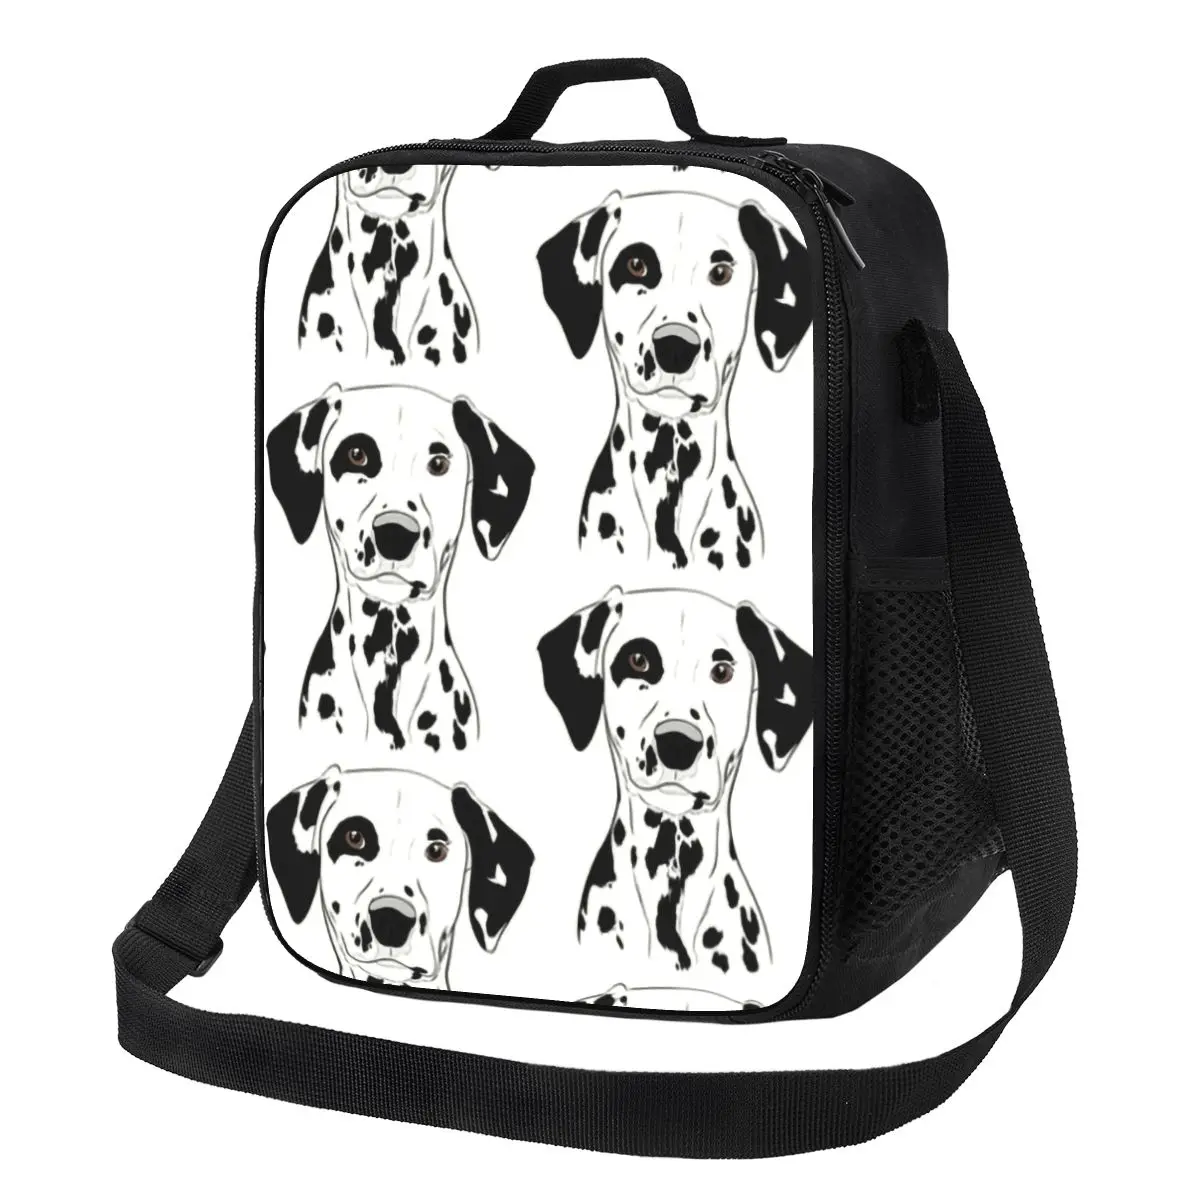 

Kawaii Dalmatian Resuable Lunch Box Leopard Carriage Firehouse Plum Pudding Dog Cooler Thermal Food Insulated Lunch Bag Student